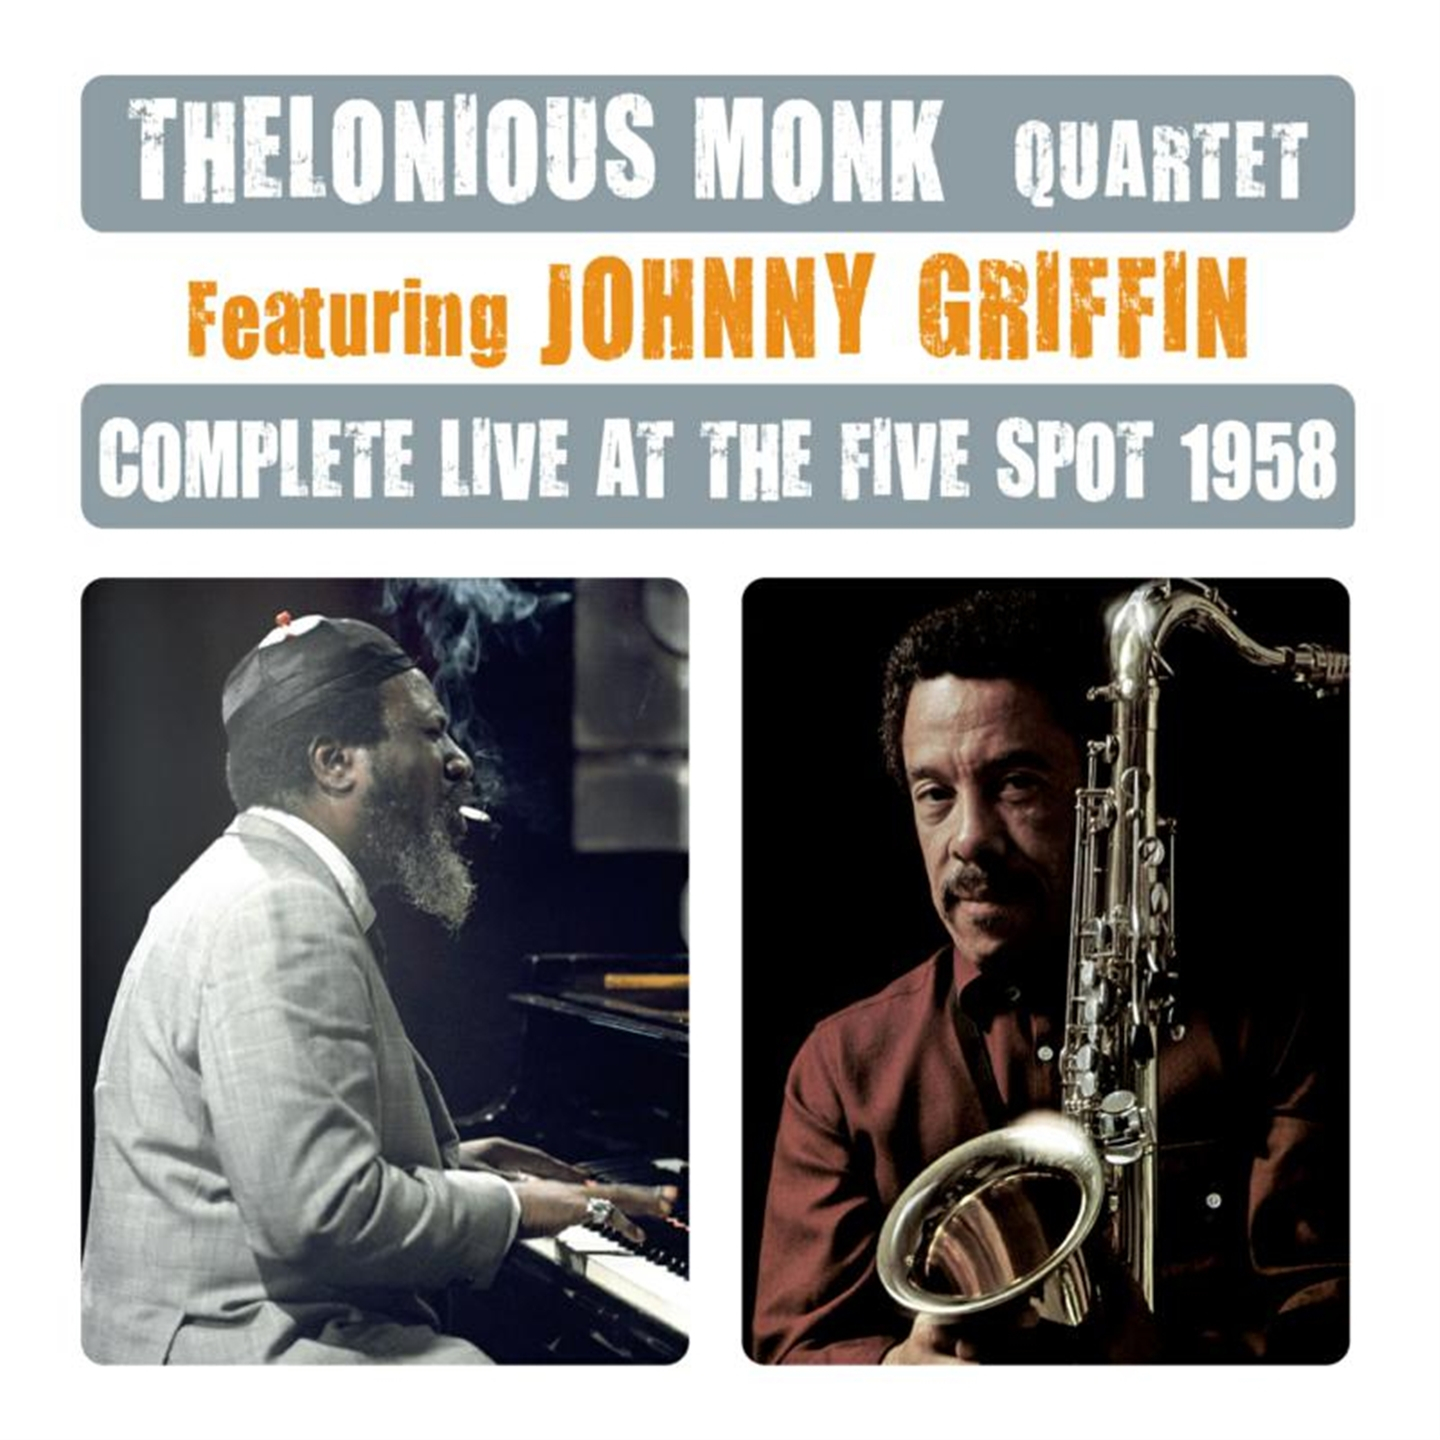 COMPLETE LIVE AT THE FIVE SPOT 1958 (2-CD SET)